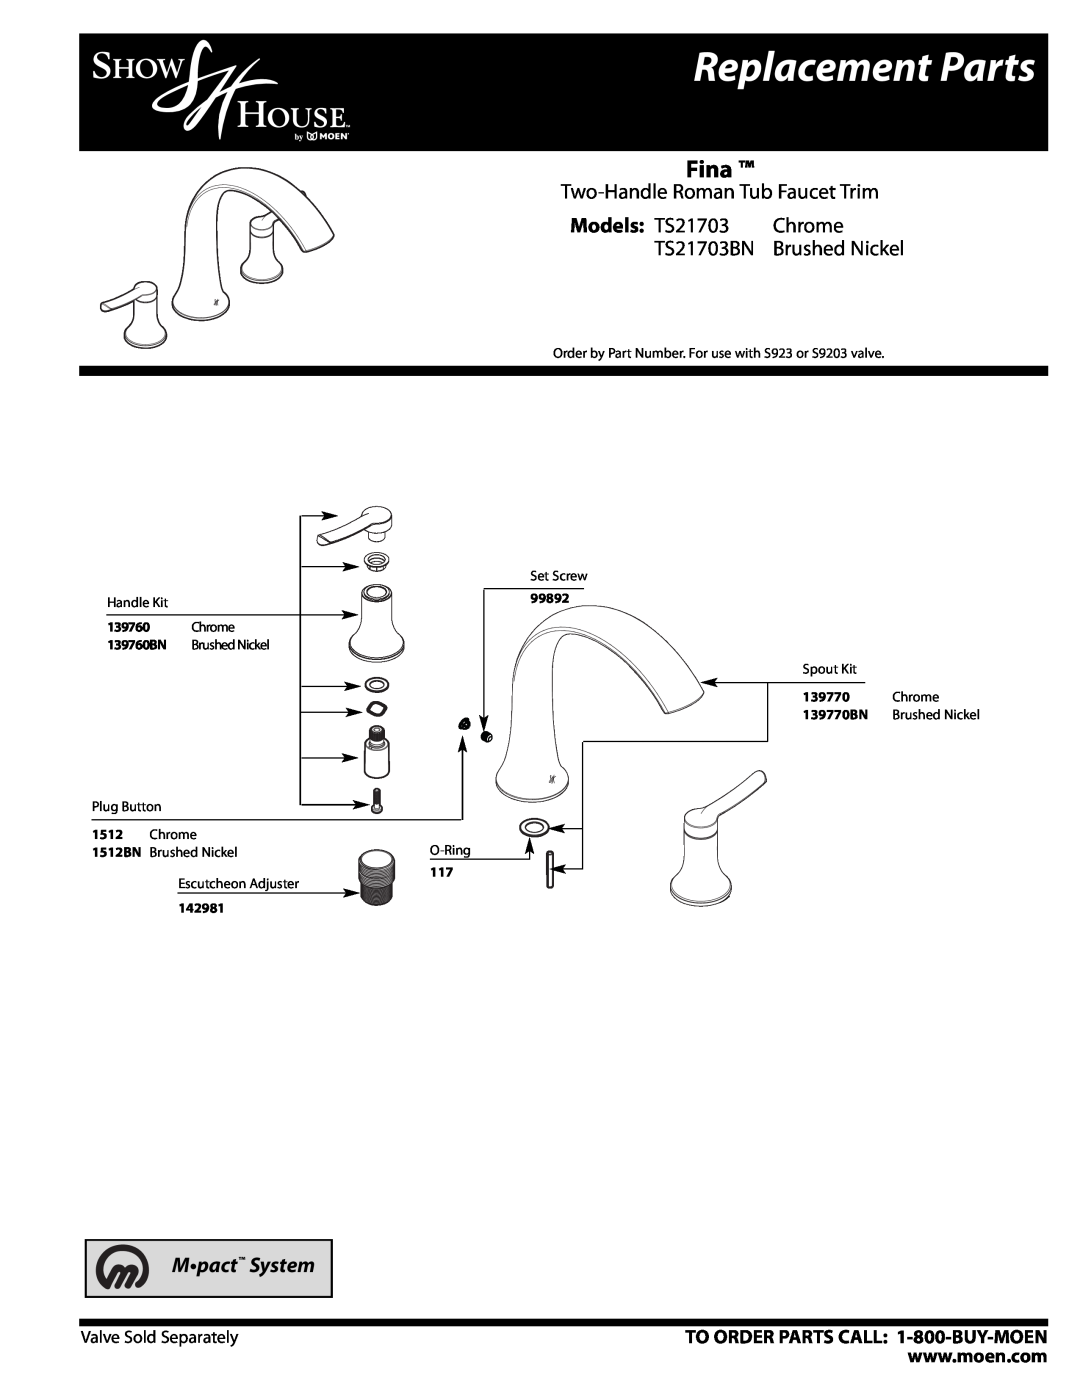 Moen manual Replacement Parts, Fina, Two-Handle Roman Tub Faucet Trim, Models TS21703, Chrome, TS21703BN, Mpact System 